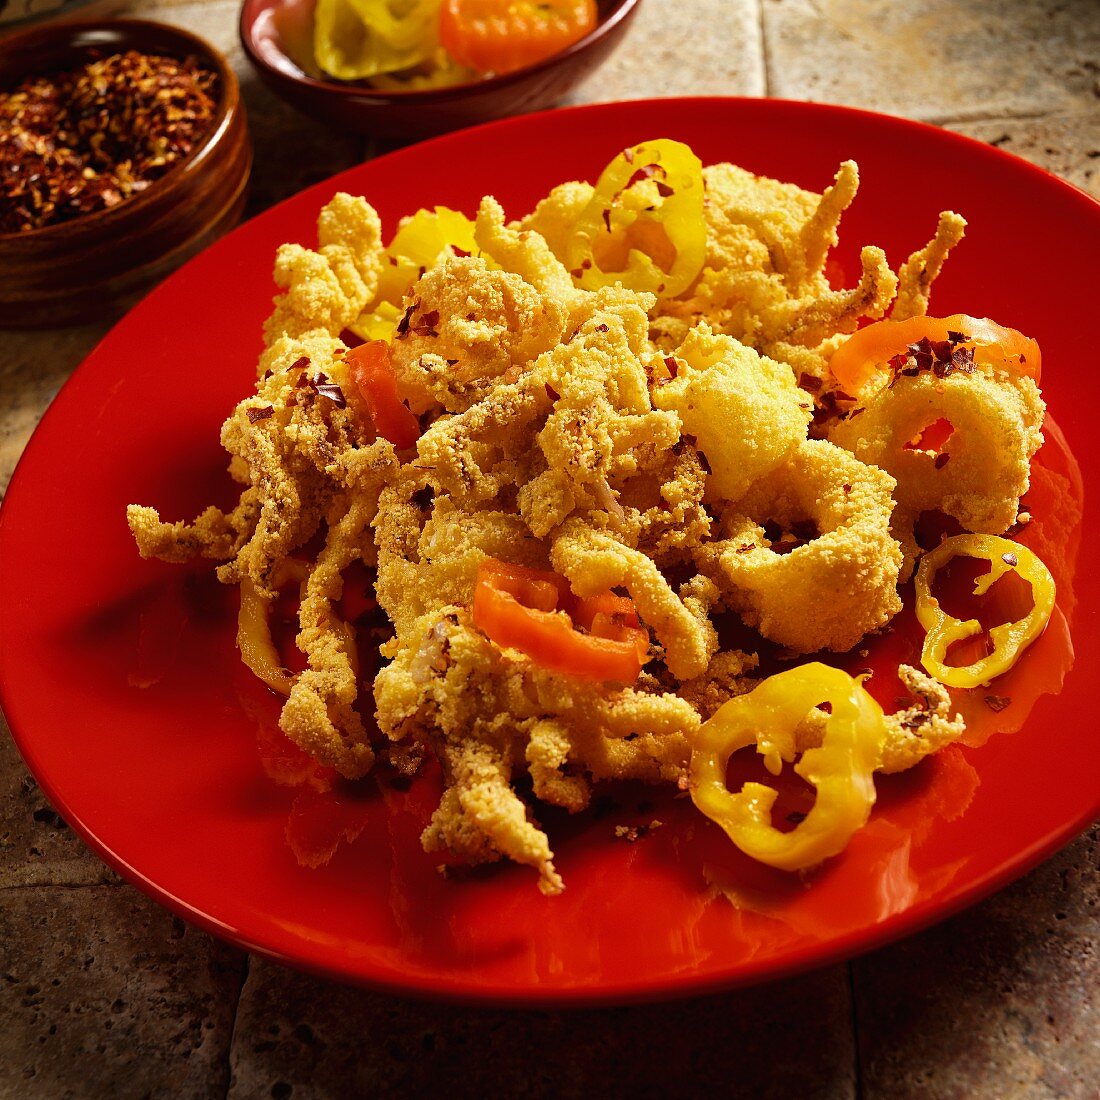 Fried squid diablo with red and yellow pickled peppers and chilli flakes